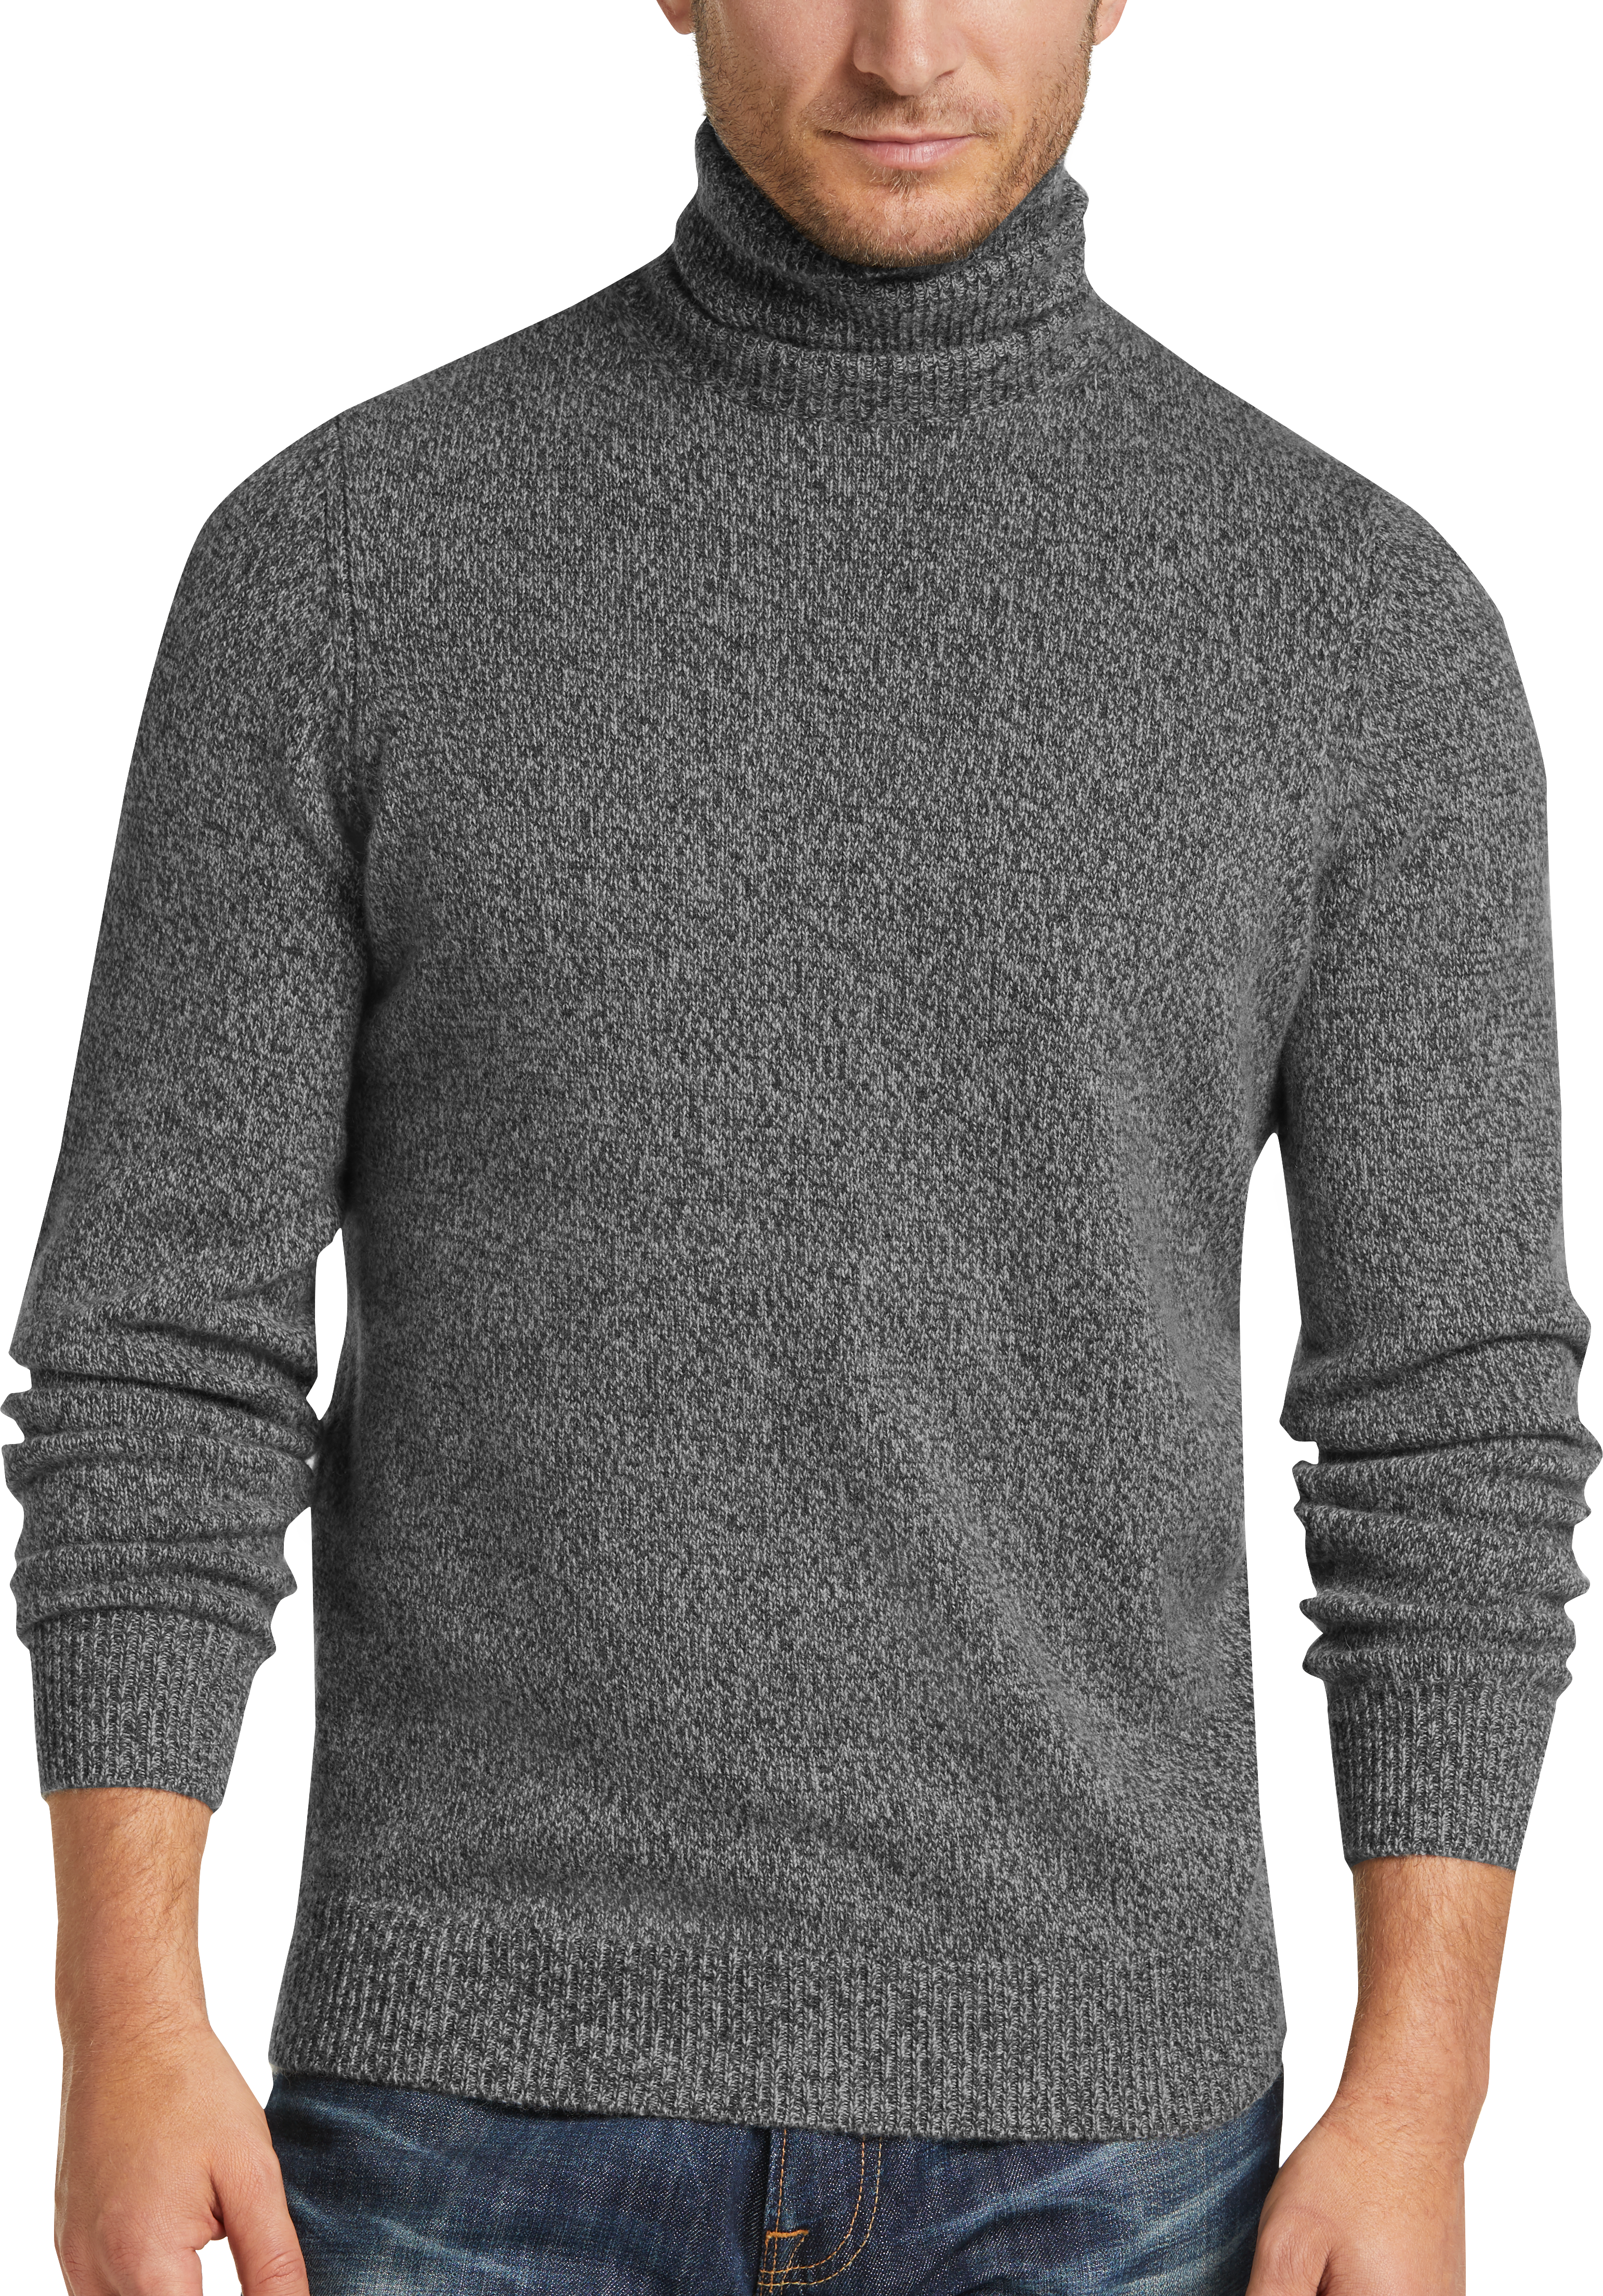 Joseph Abboud Limited Edition Charcoal Cashmere Turtleneck Sweater ...